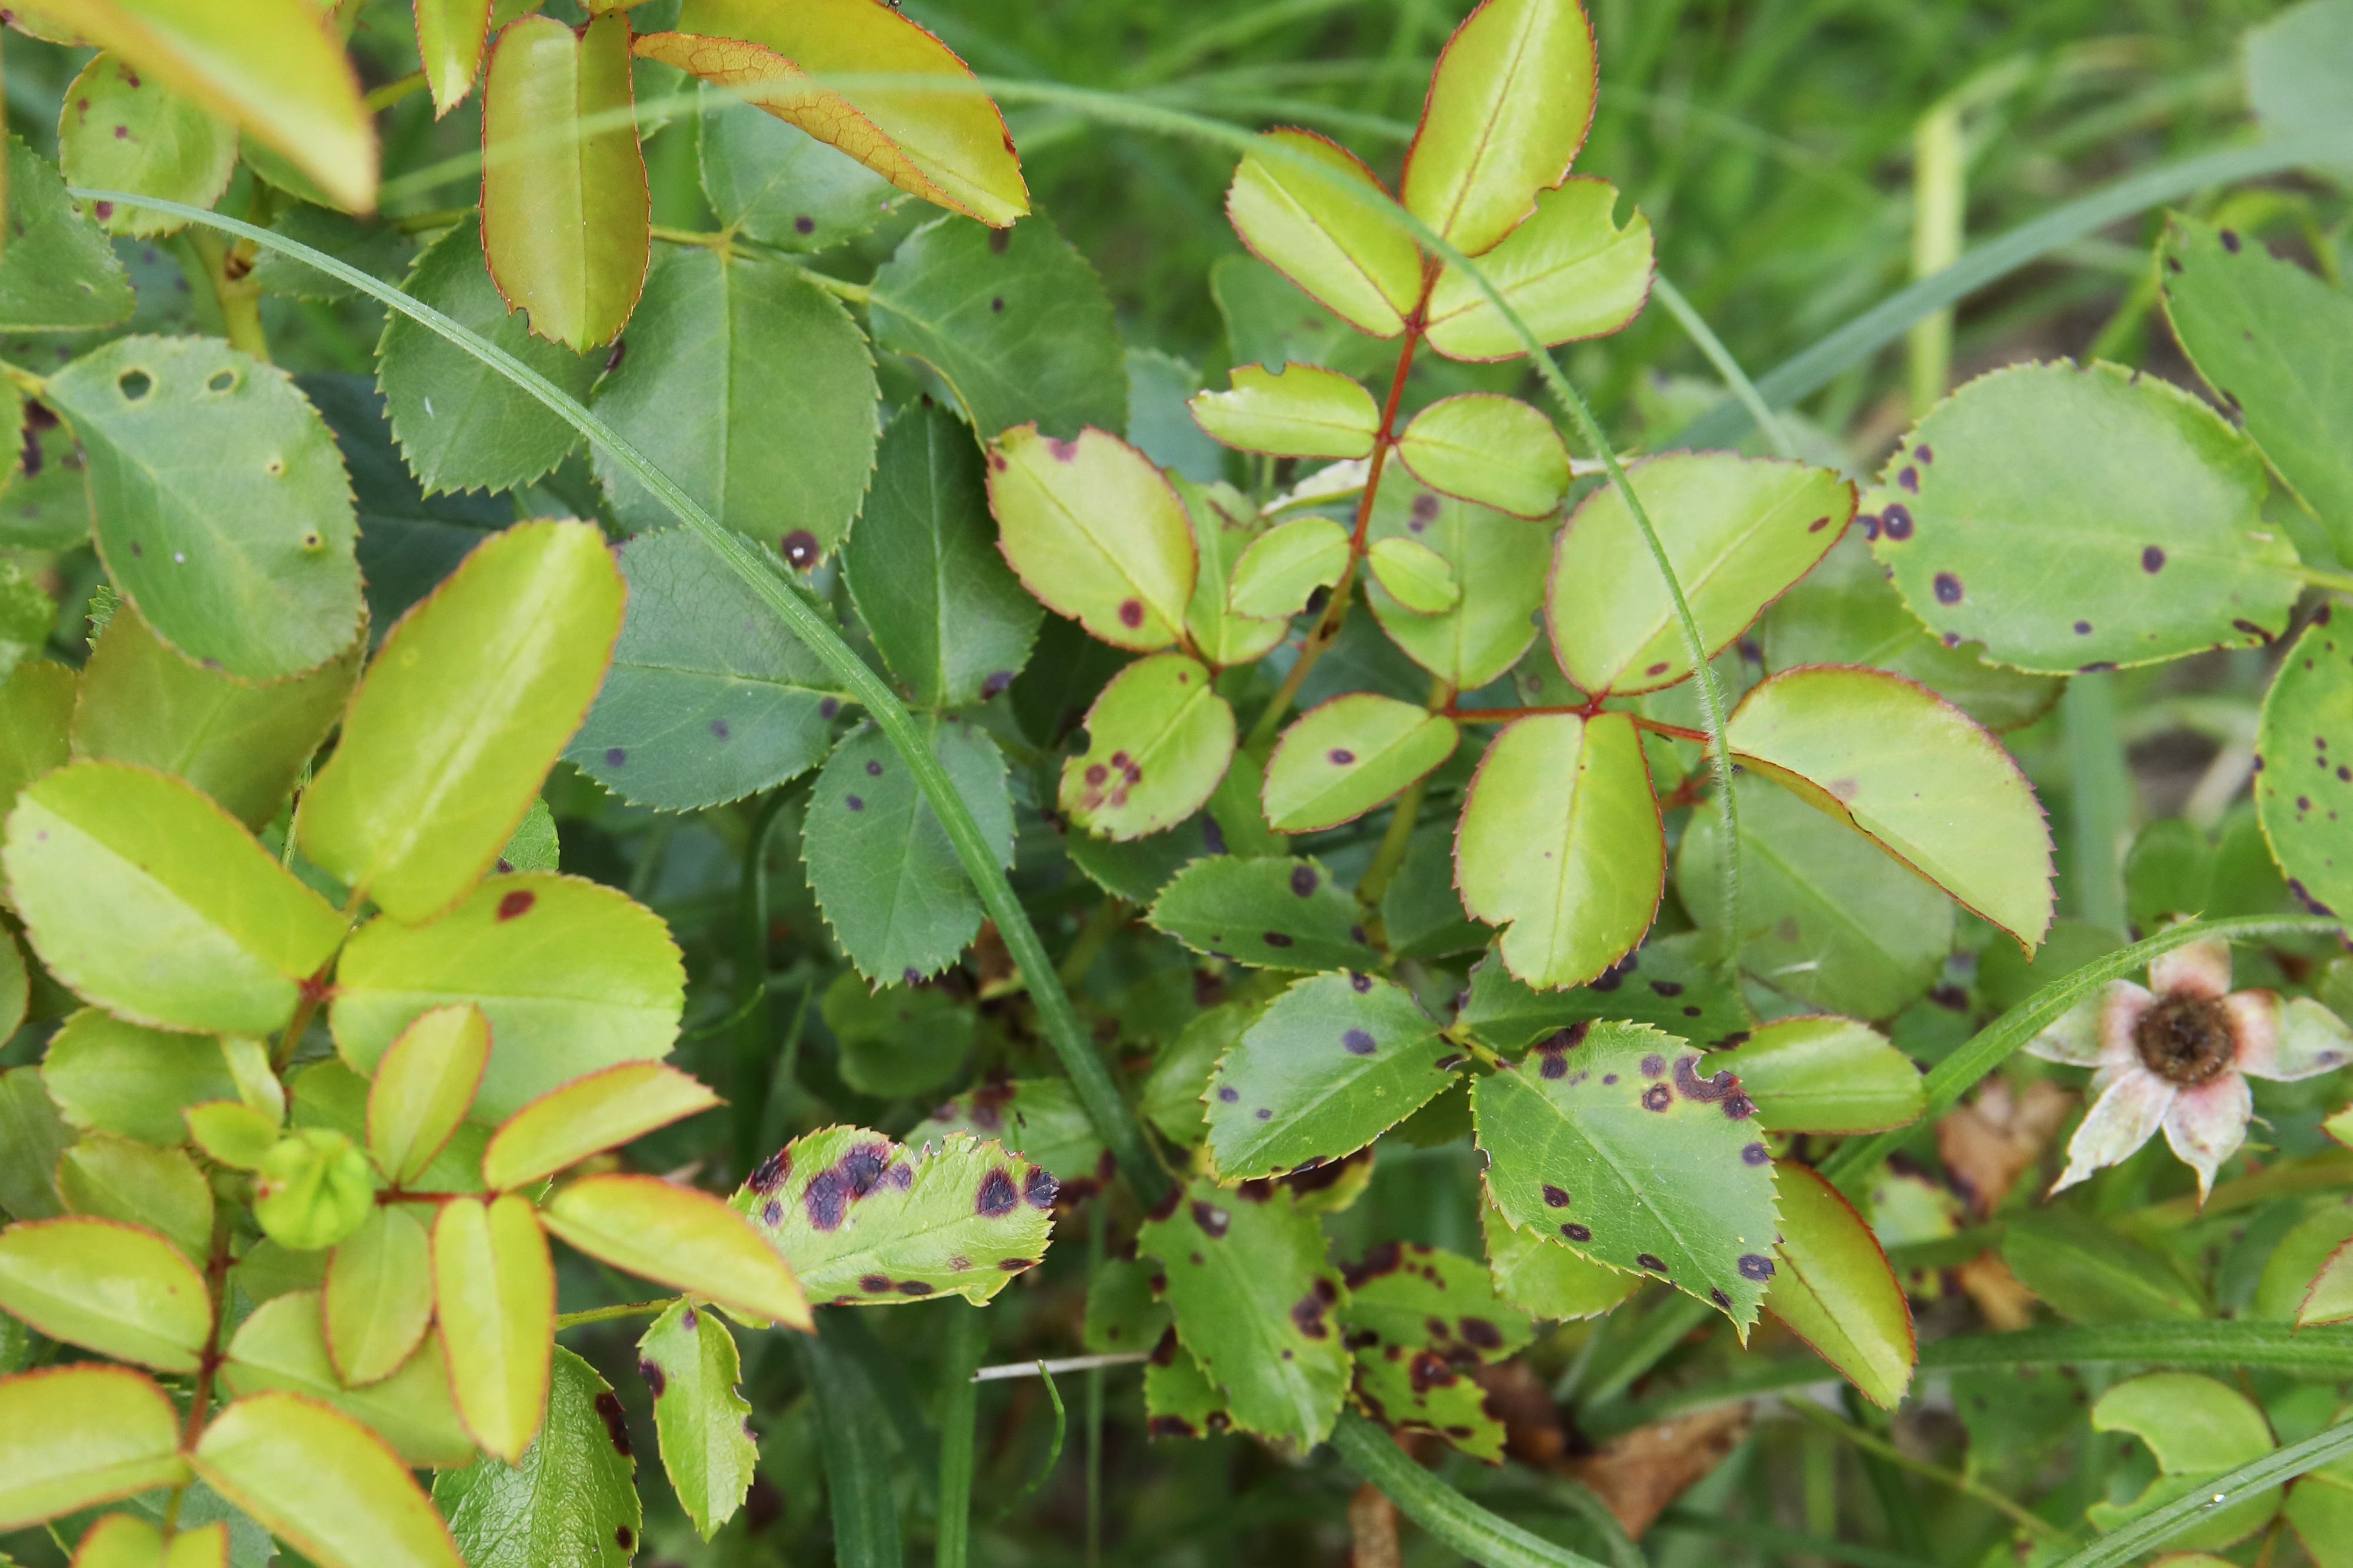 leaves of roses infected by blackspot fungus. Roses disease